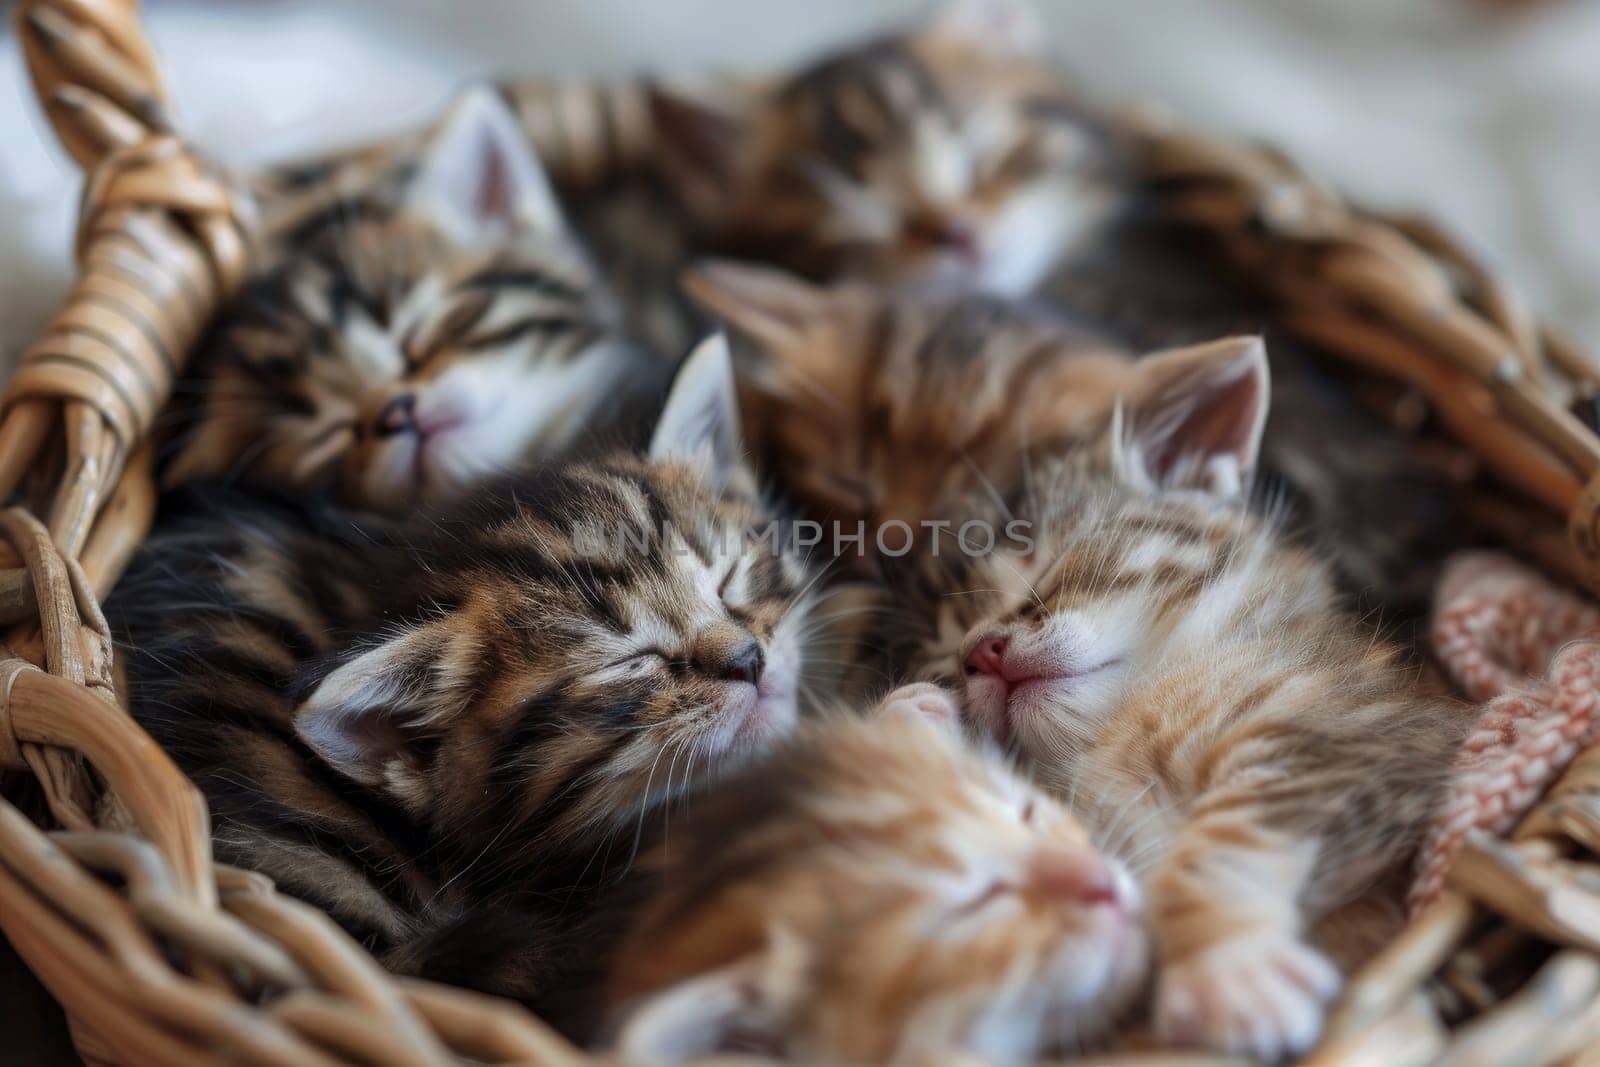 A basket overflowing with fluffy newborn kittens curled up together, fast a sleep. by Chawagen